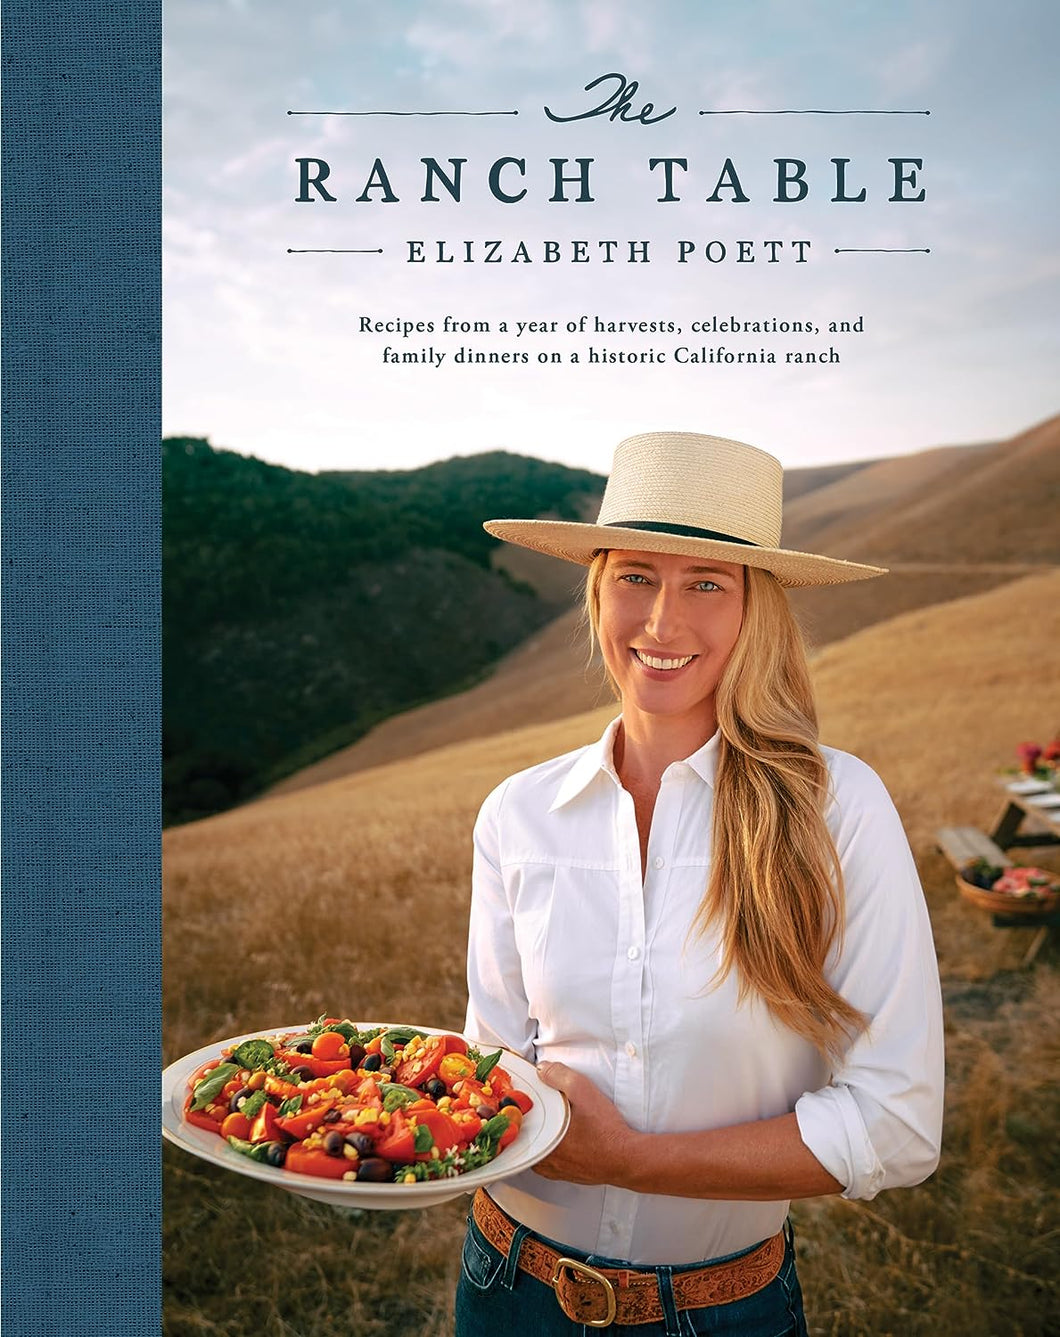 The Ranch Table: Recipes from a Year of Harvests, Celebrations, and Family Dinners on a Historic California Ranch by Elizabeth Poett, Georgia Freedman